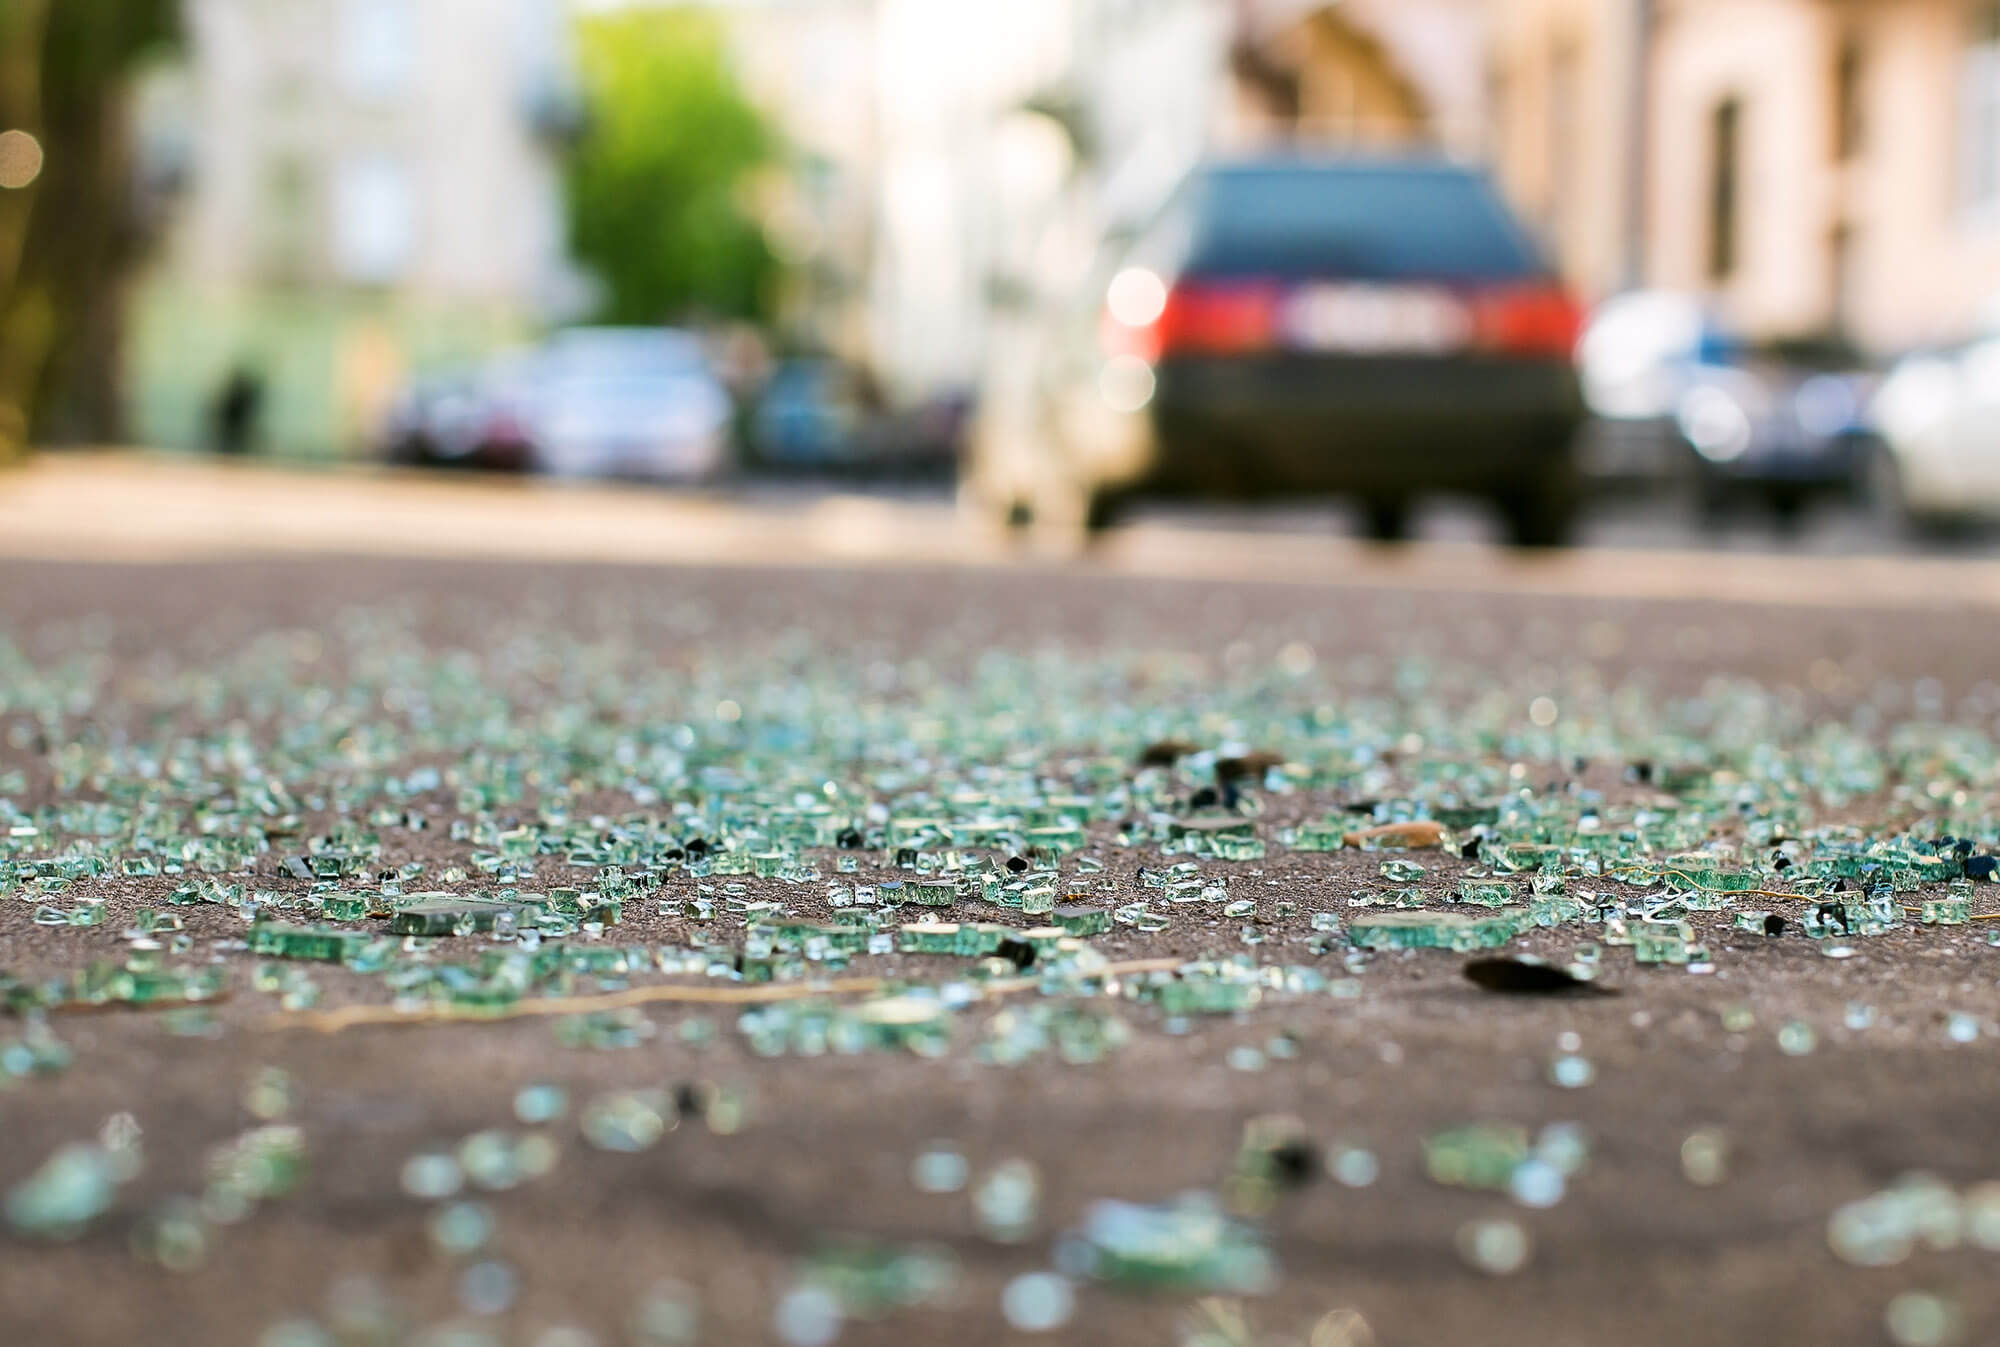 Seven frequently asked questions about accidents involving hit-and-run drivers